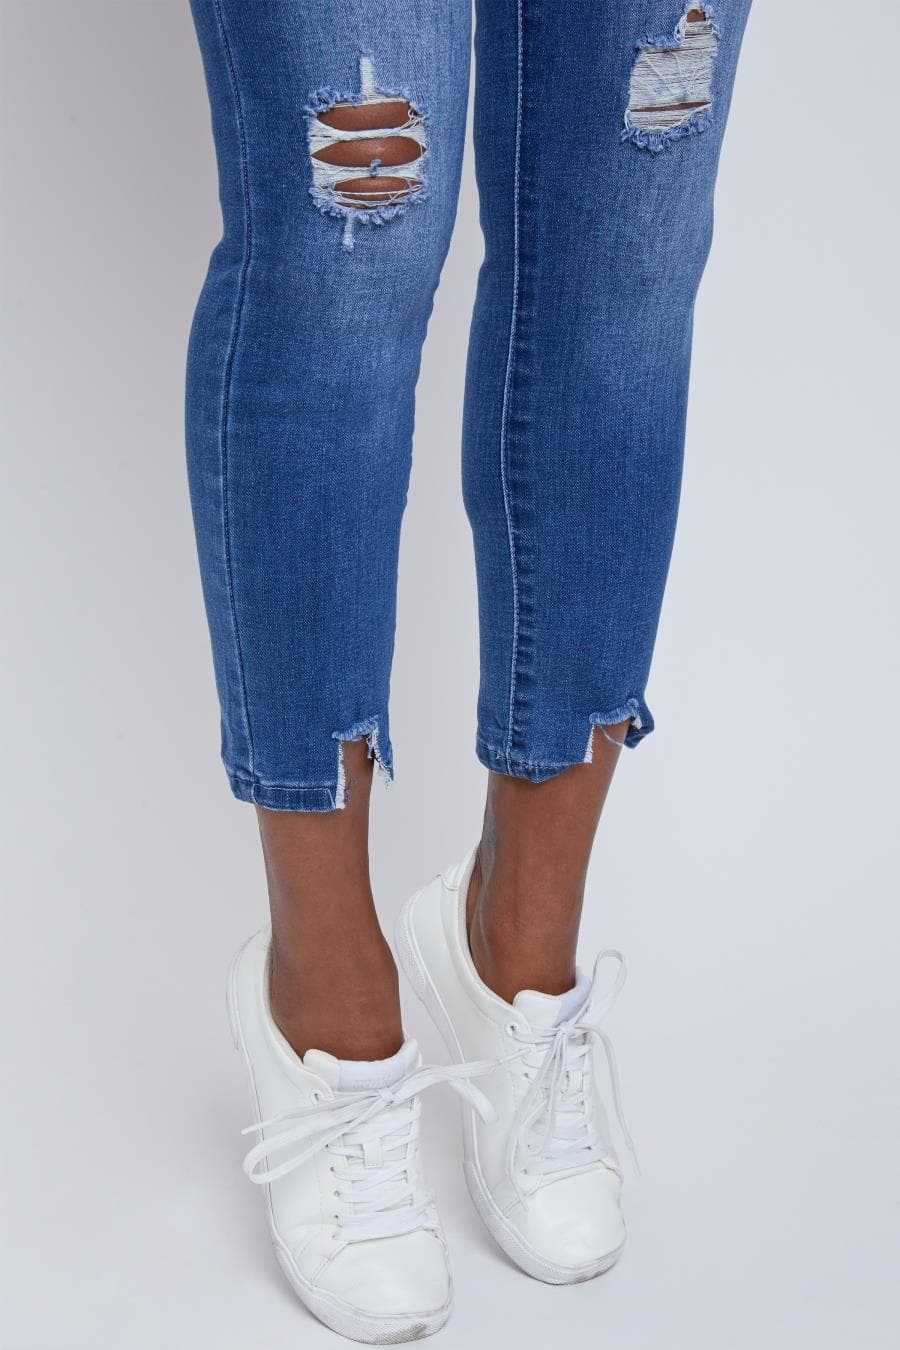 Women's Essential High Rise Cuffed Capri Jeans from ROYALTY